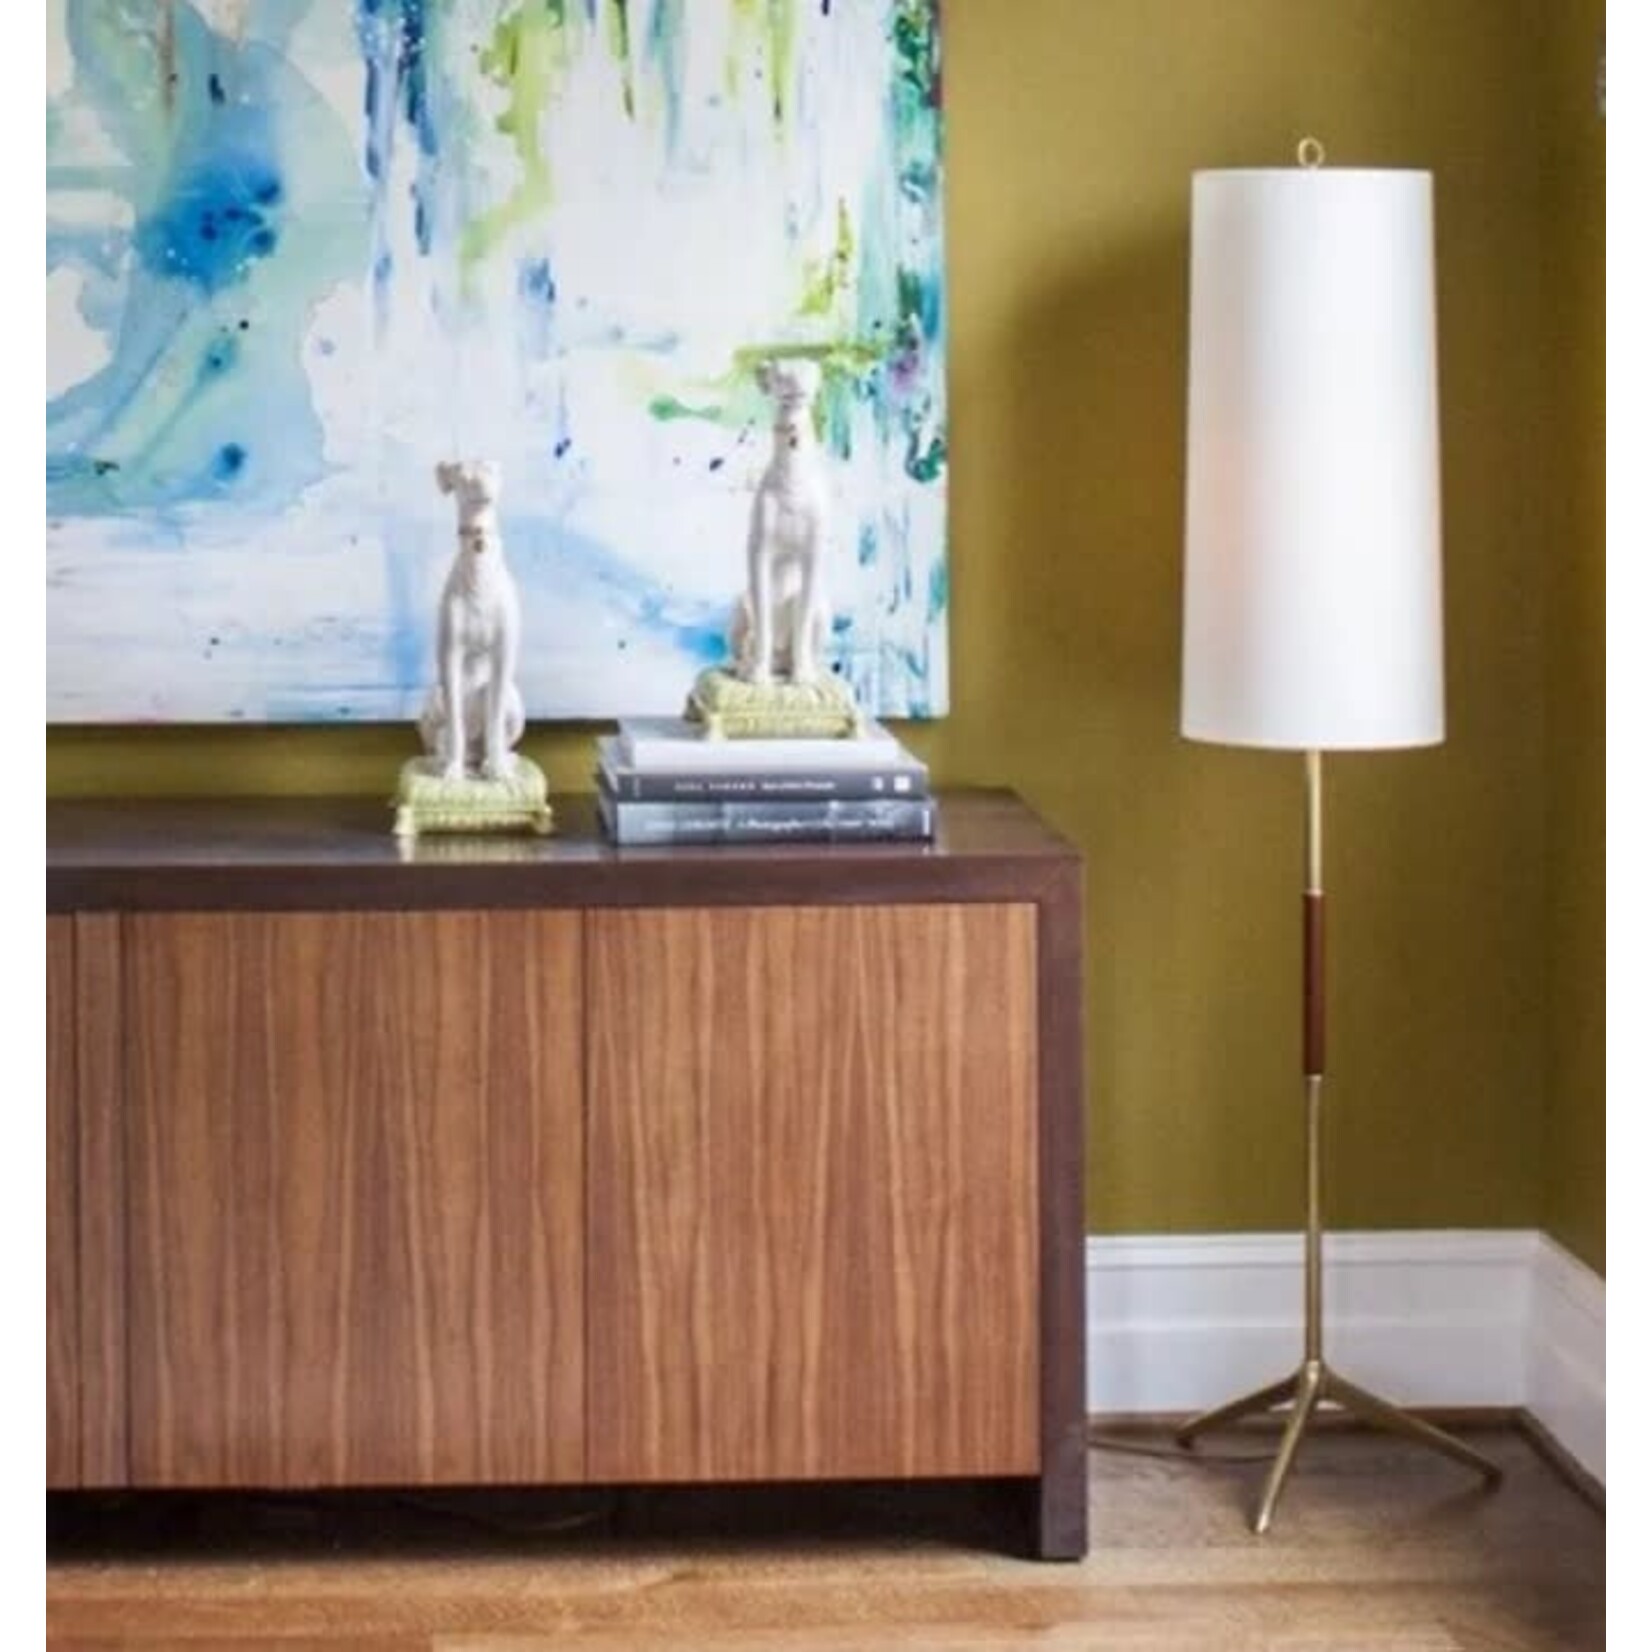 Visual Comfort Frankfort Floor Lamp in Hand-Rubbed Antique Brass with Mahogany Accents and Linen Shade